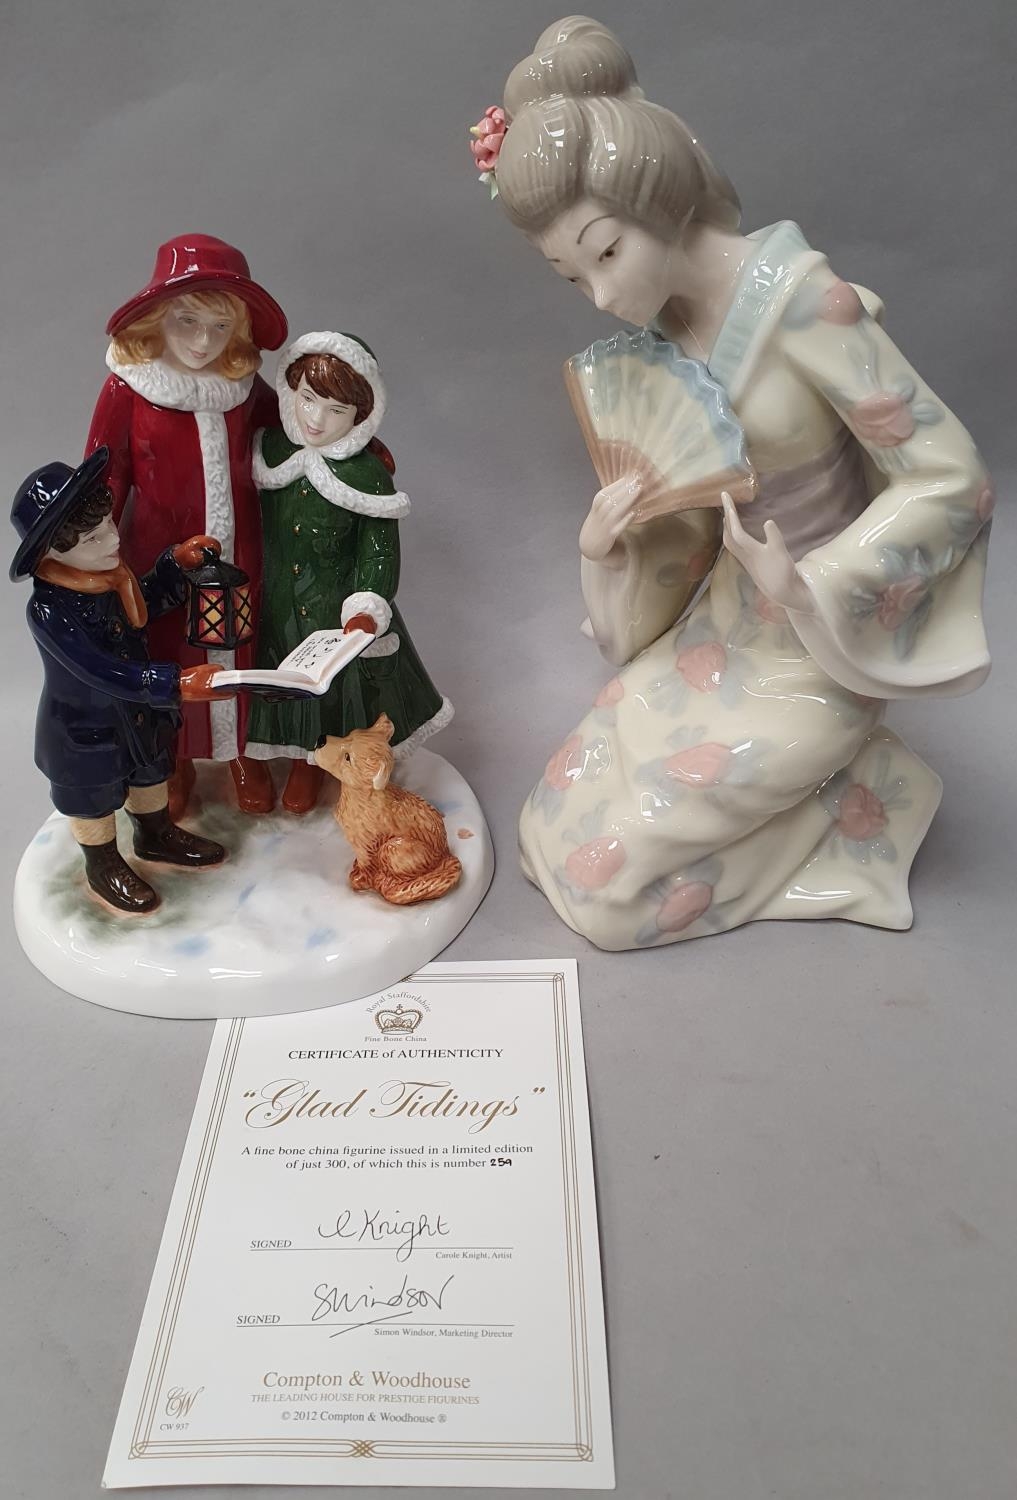 "Glad Tidings" Limited edition figurine 259/300 with certificate together with Geisha girl figurine.